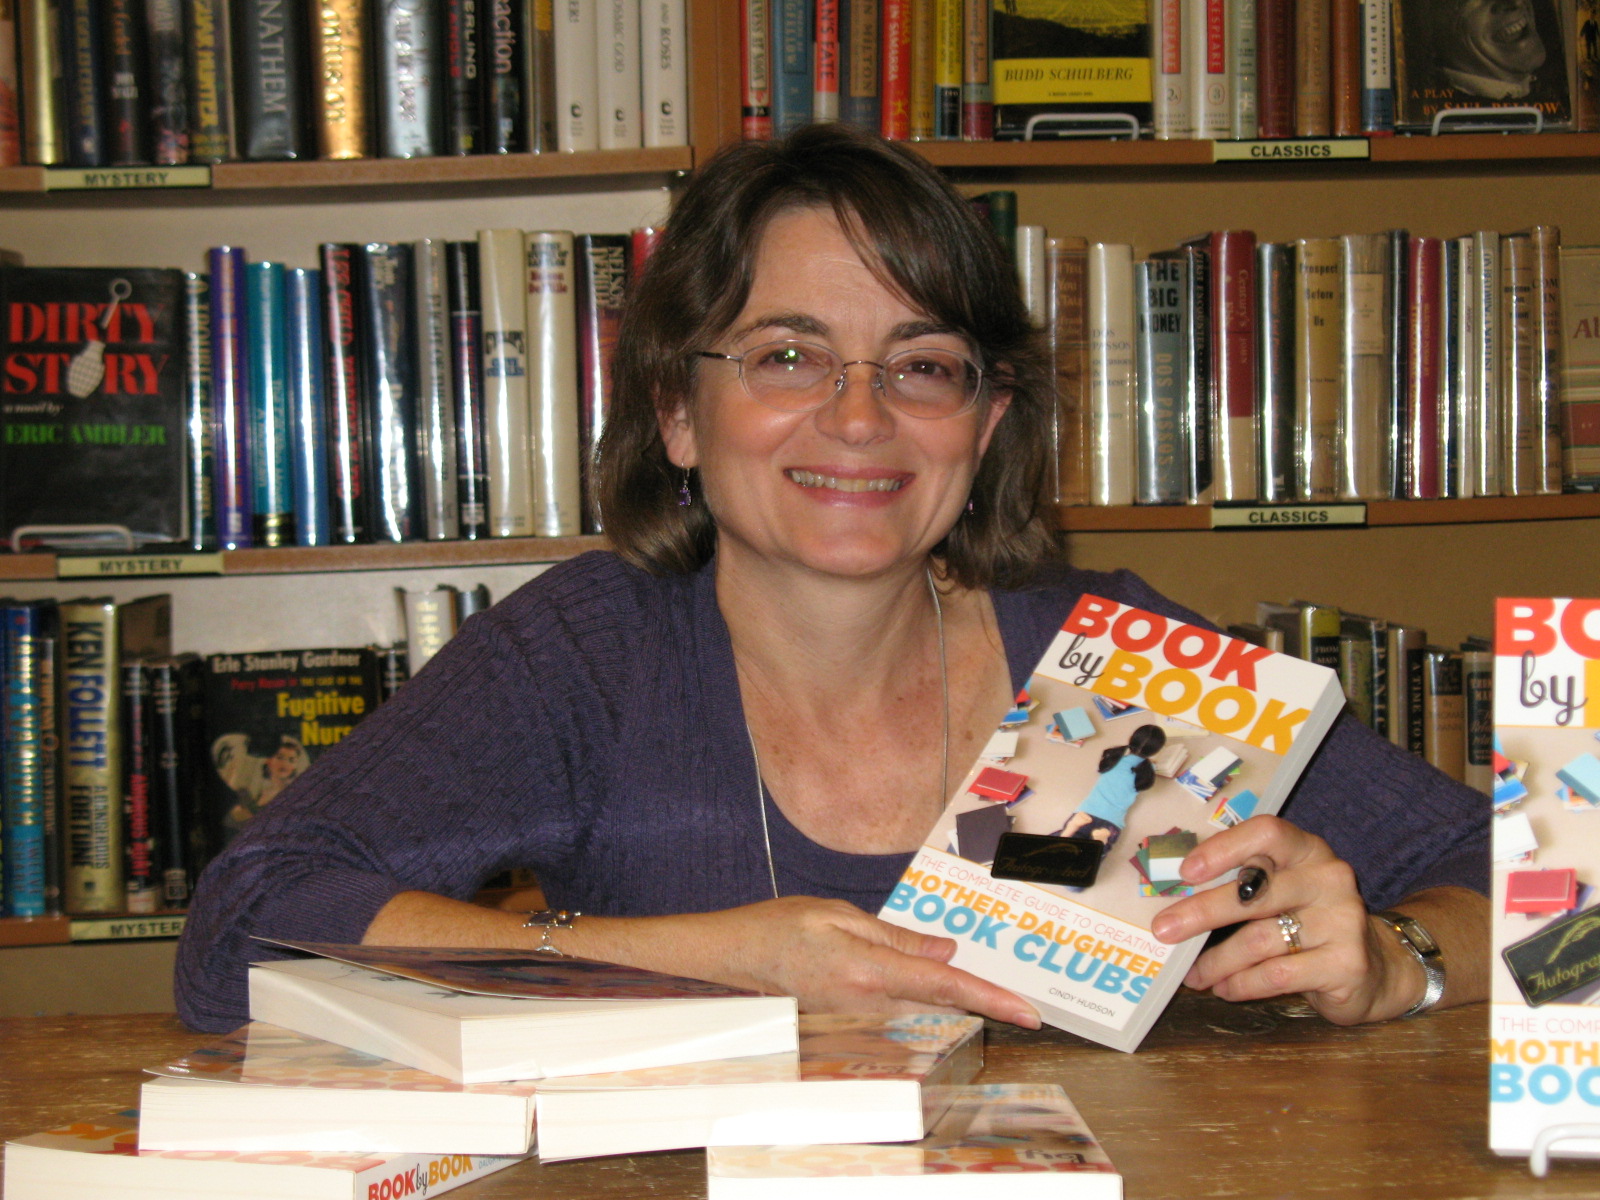 Cindy Hudson at Third Place Books 1 image